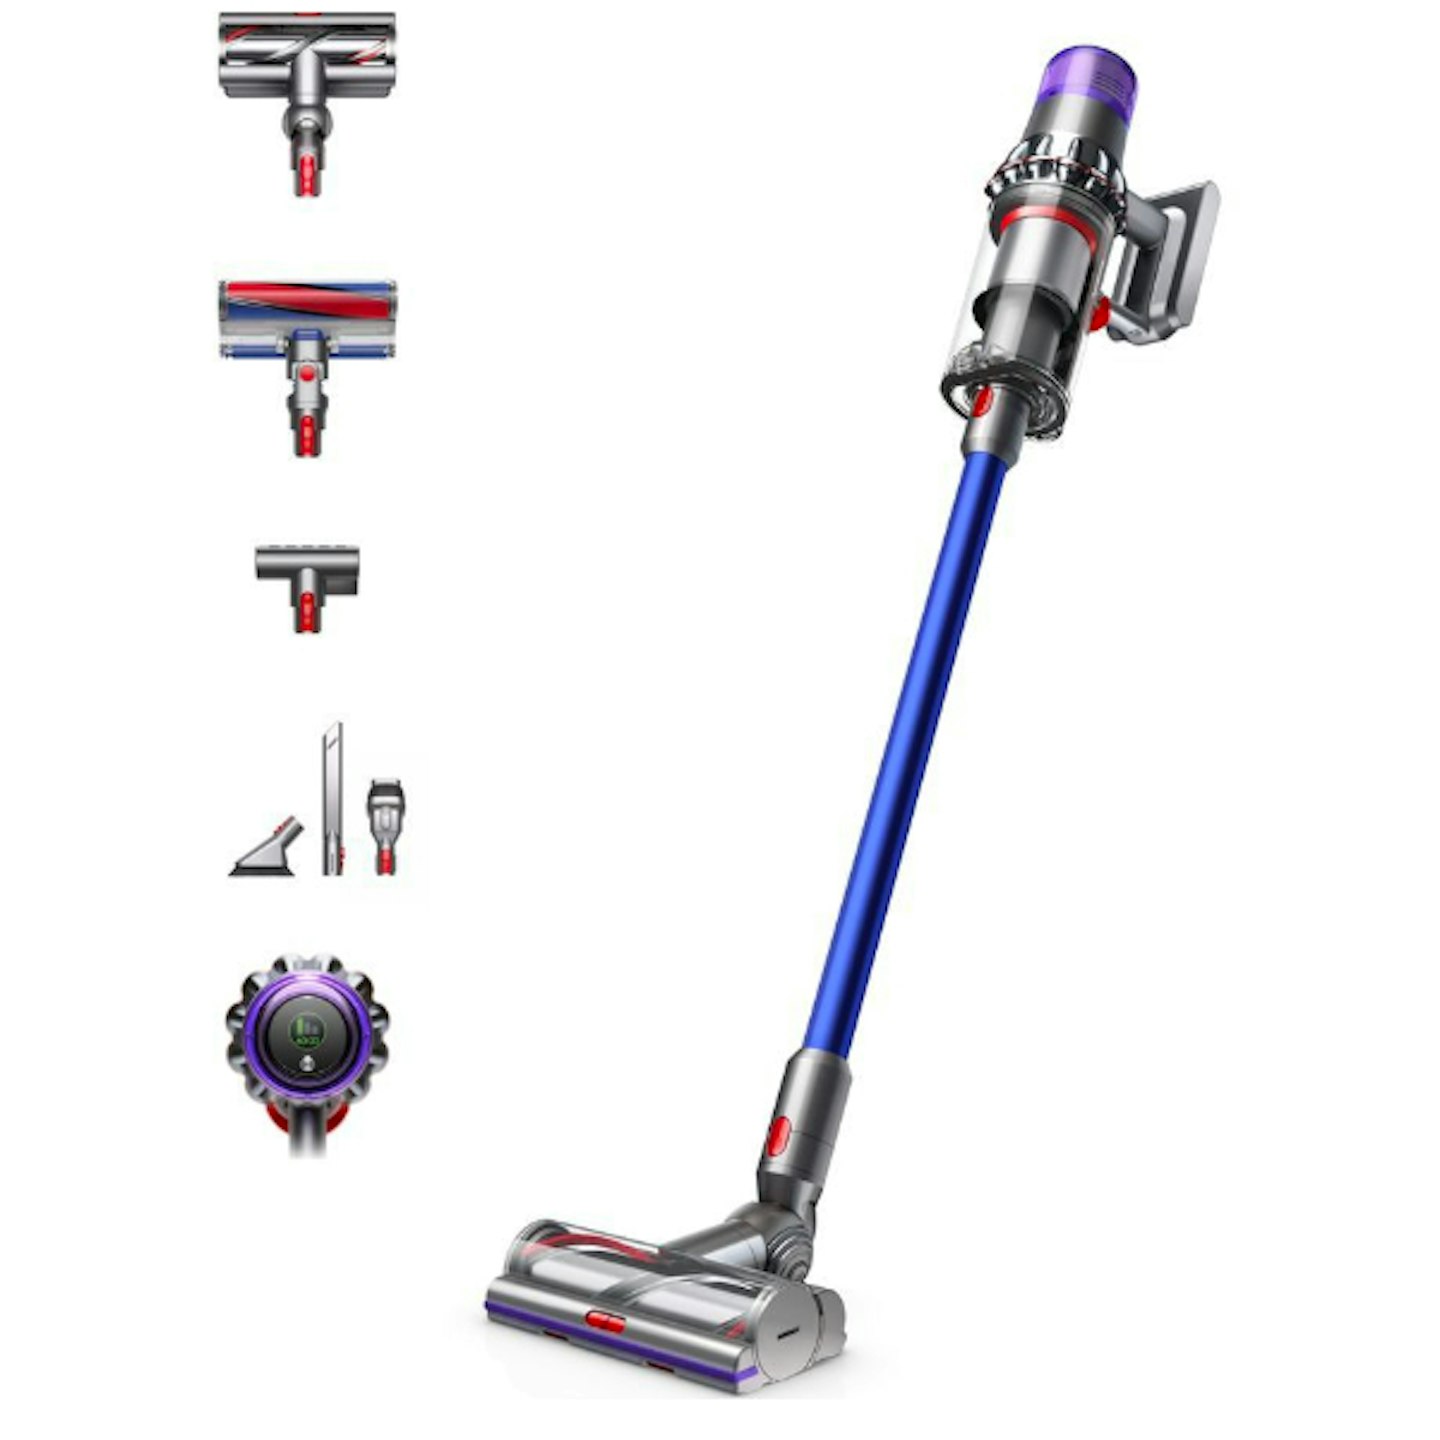 DYSON V11 Absolute Cordless Vacuum Cleaner